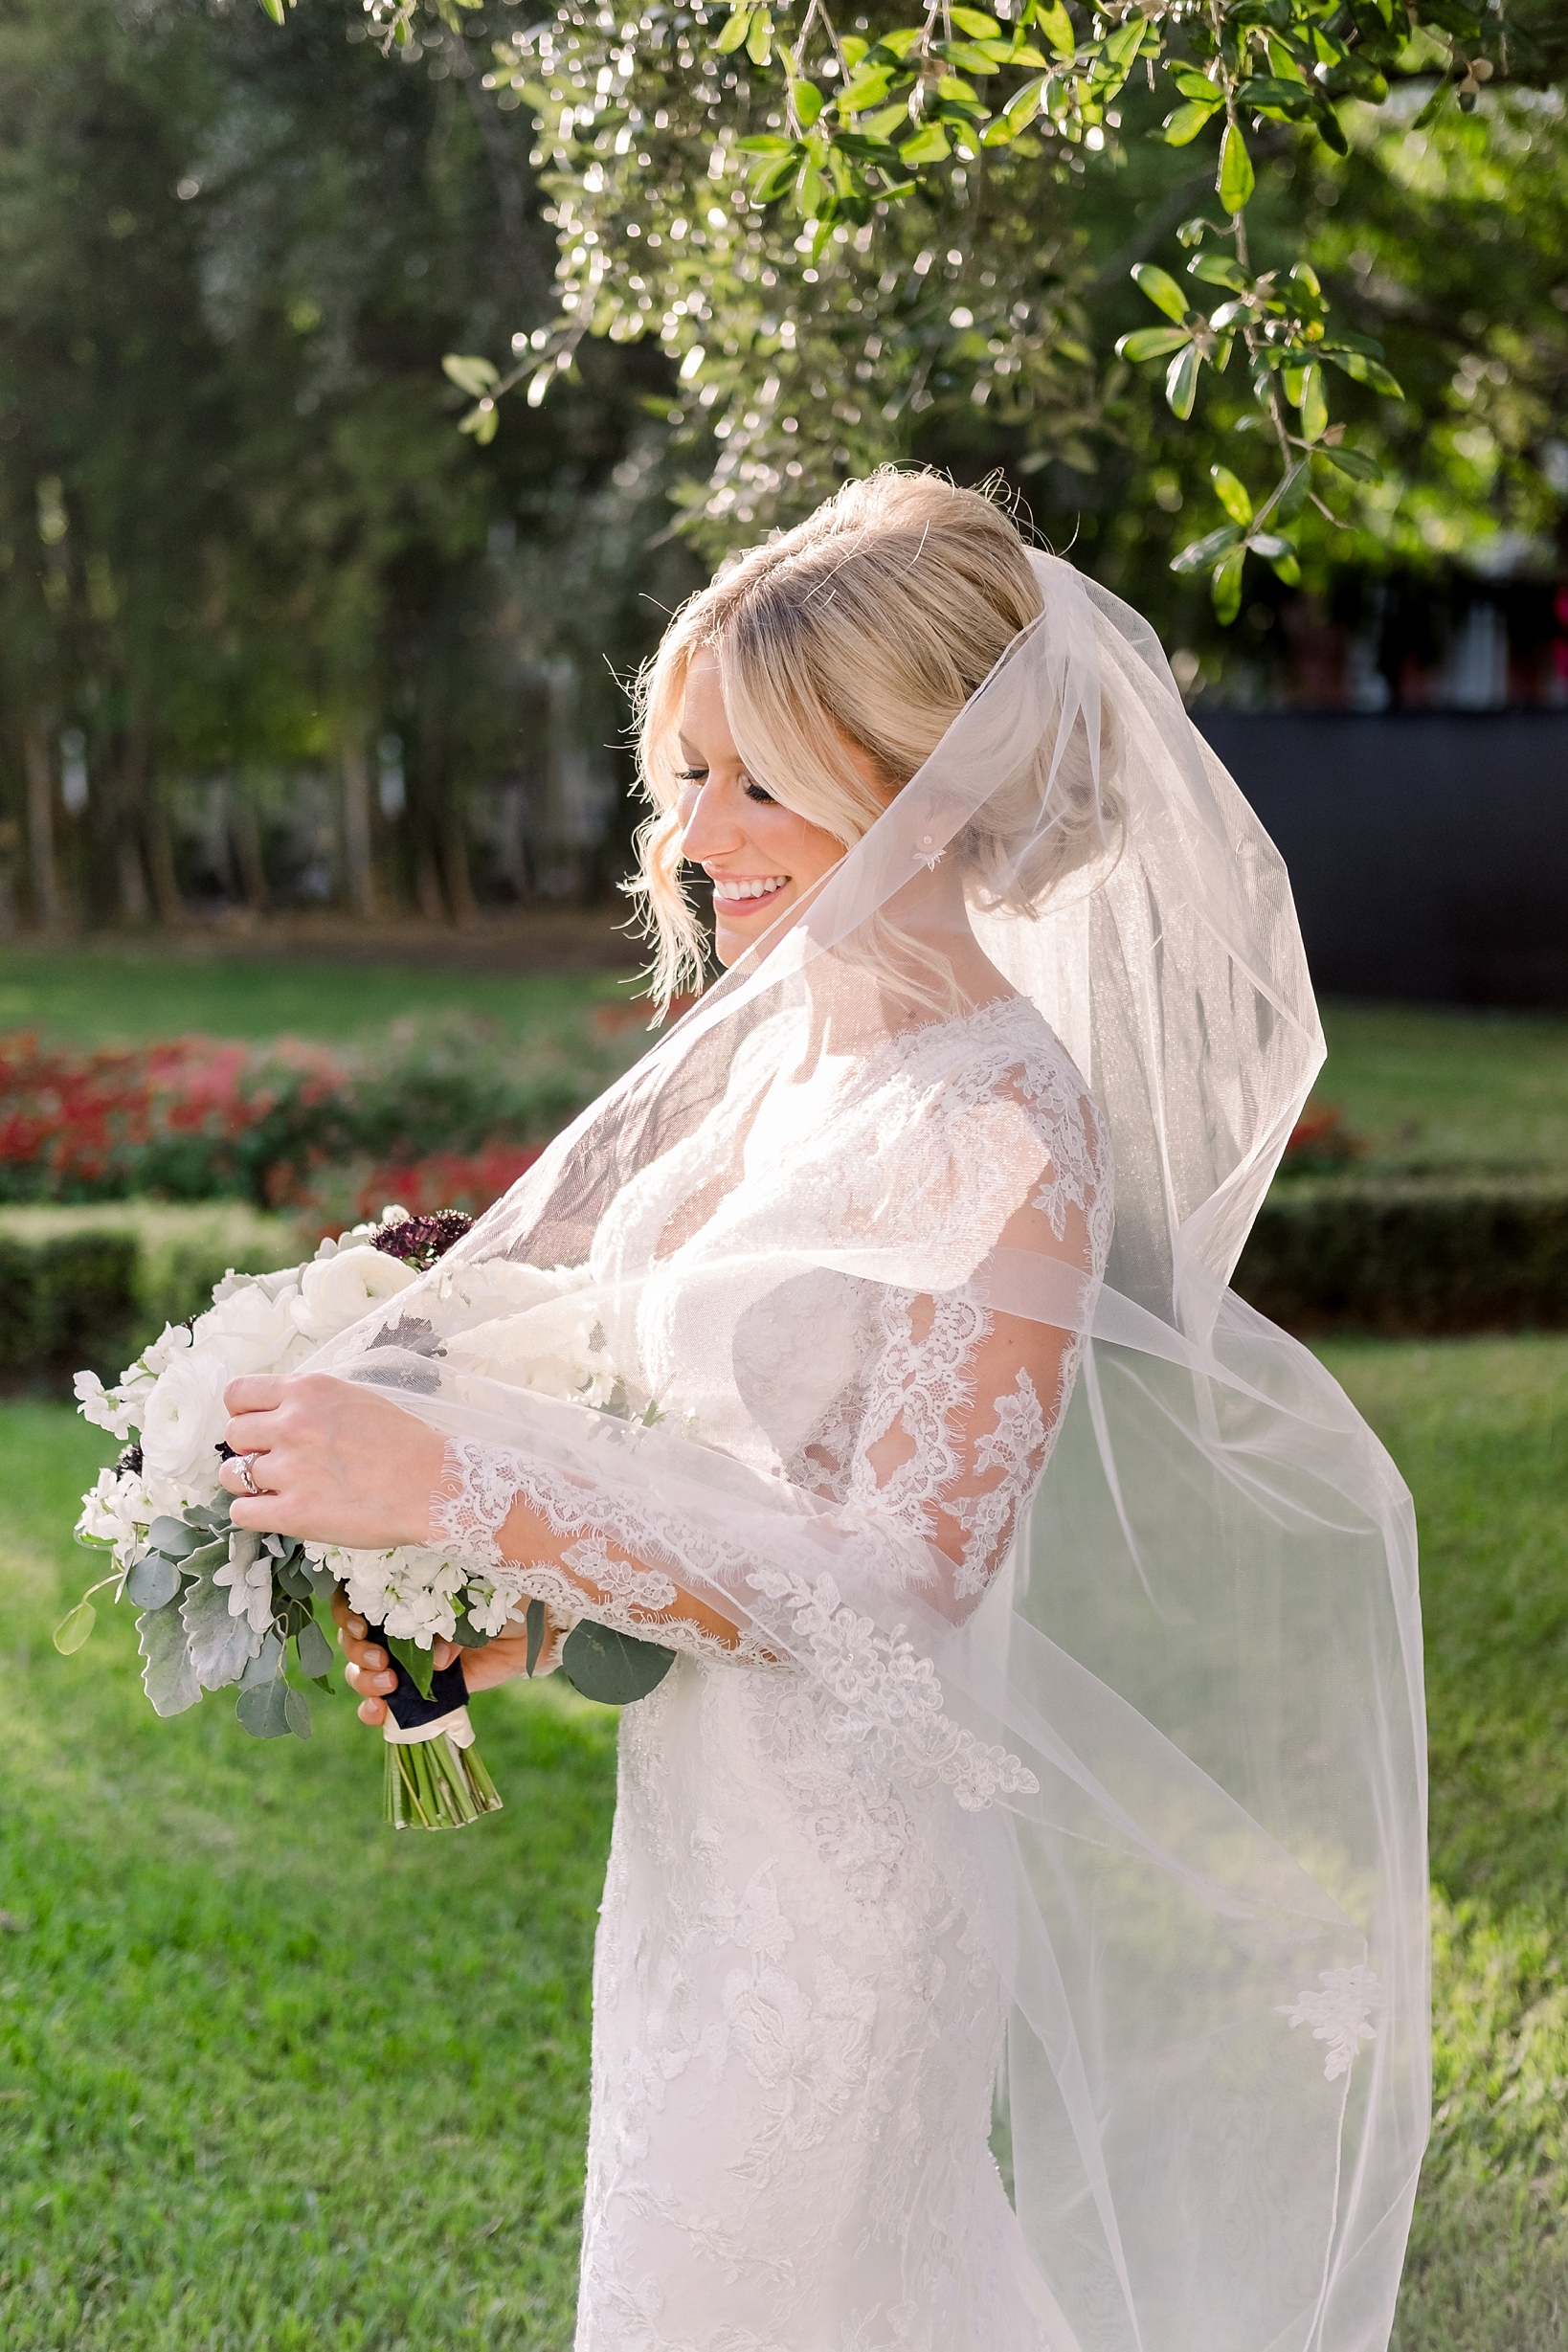 The bride caught in a candid moment with her veil by Sarah & Ben Photography